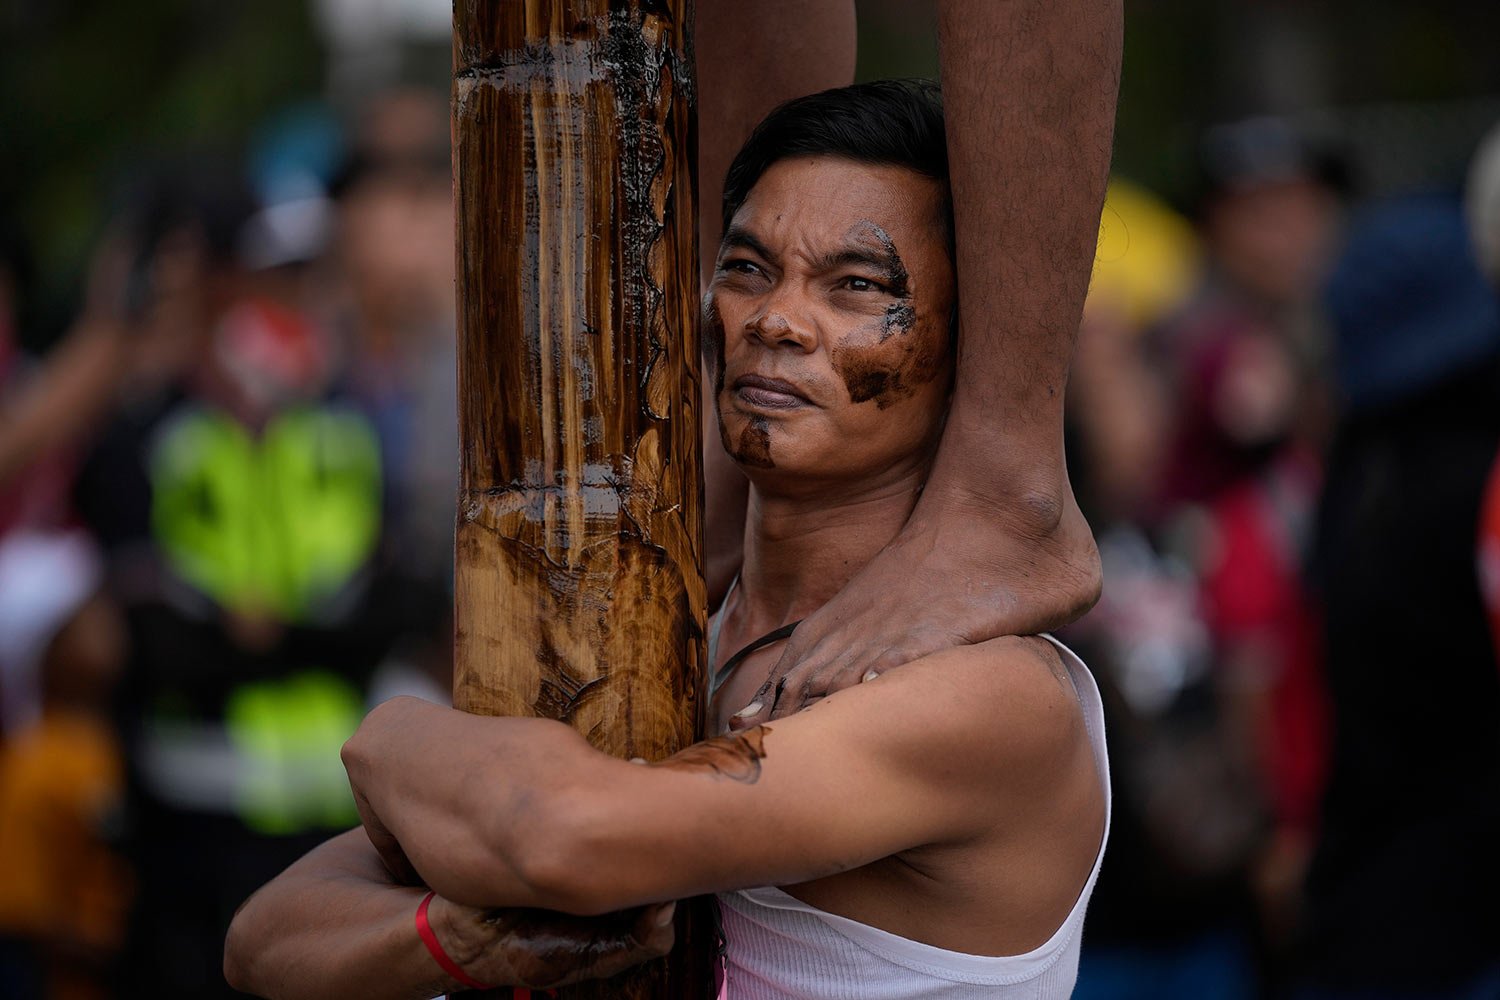  A participant bears the weight of other men above him as people climb greased poles to retrieve prizes during a greased-pole climbing competition held as a part of Independence Day celebrations at Ancol Beach in Jakarta, Indonesia Wednesday, Aug. 17